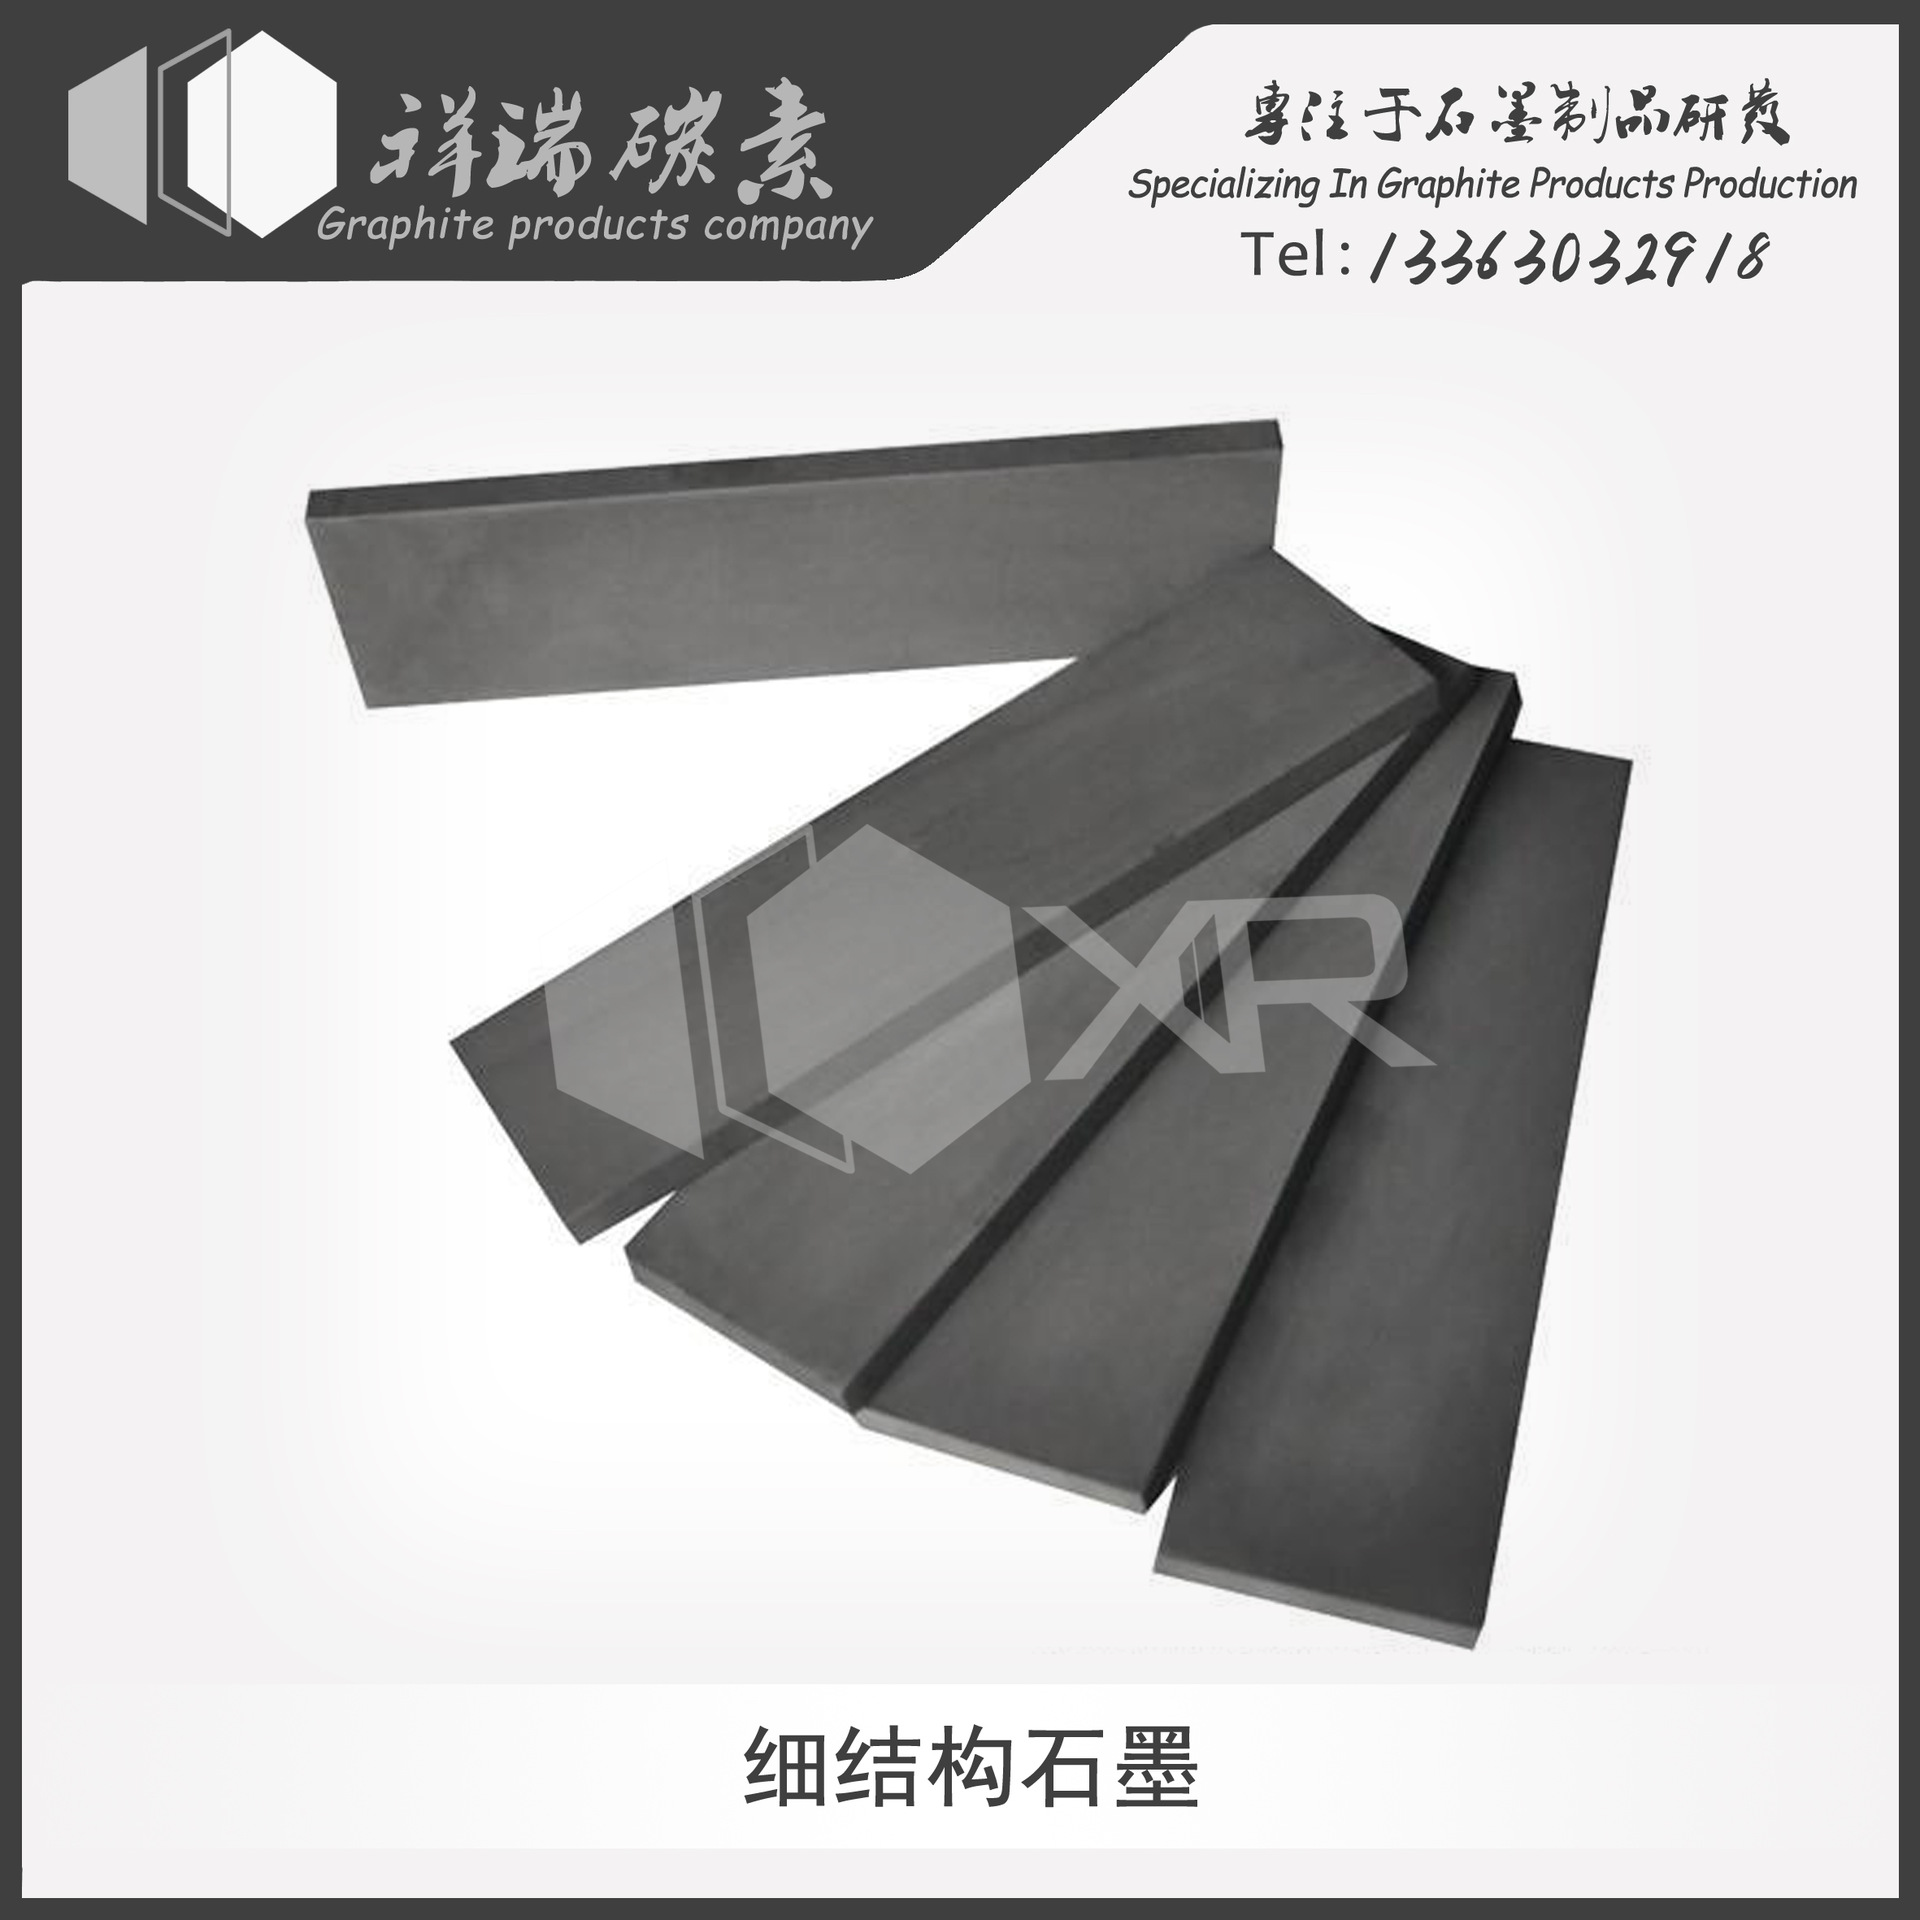 Finely structured graphite structure Graphite products